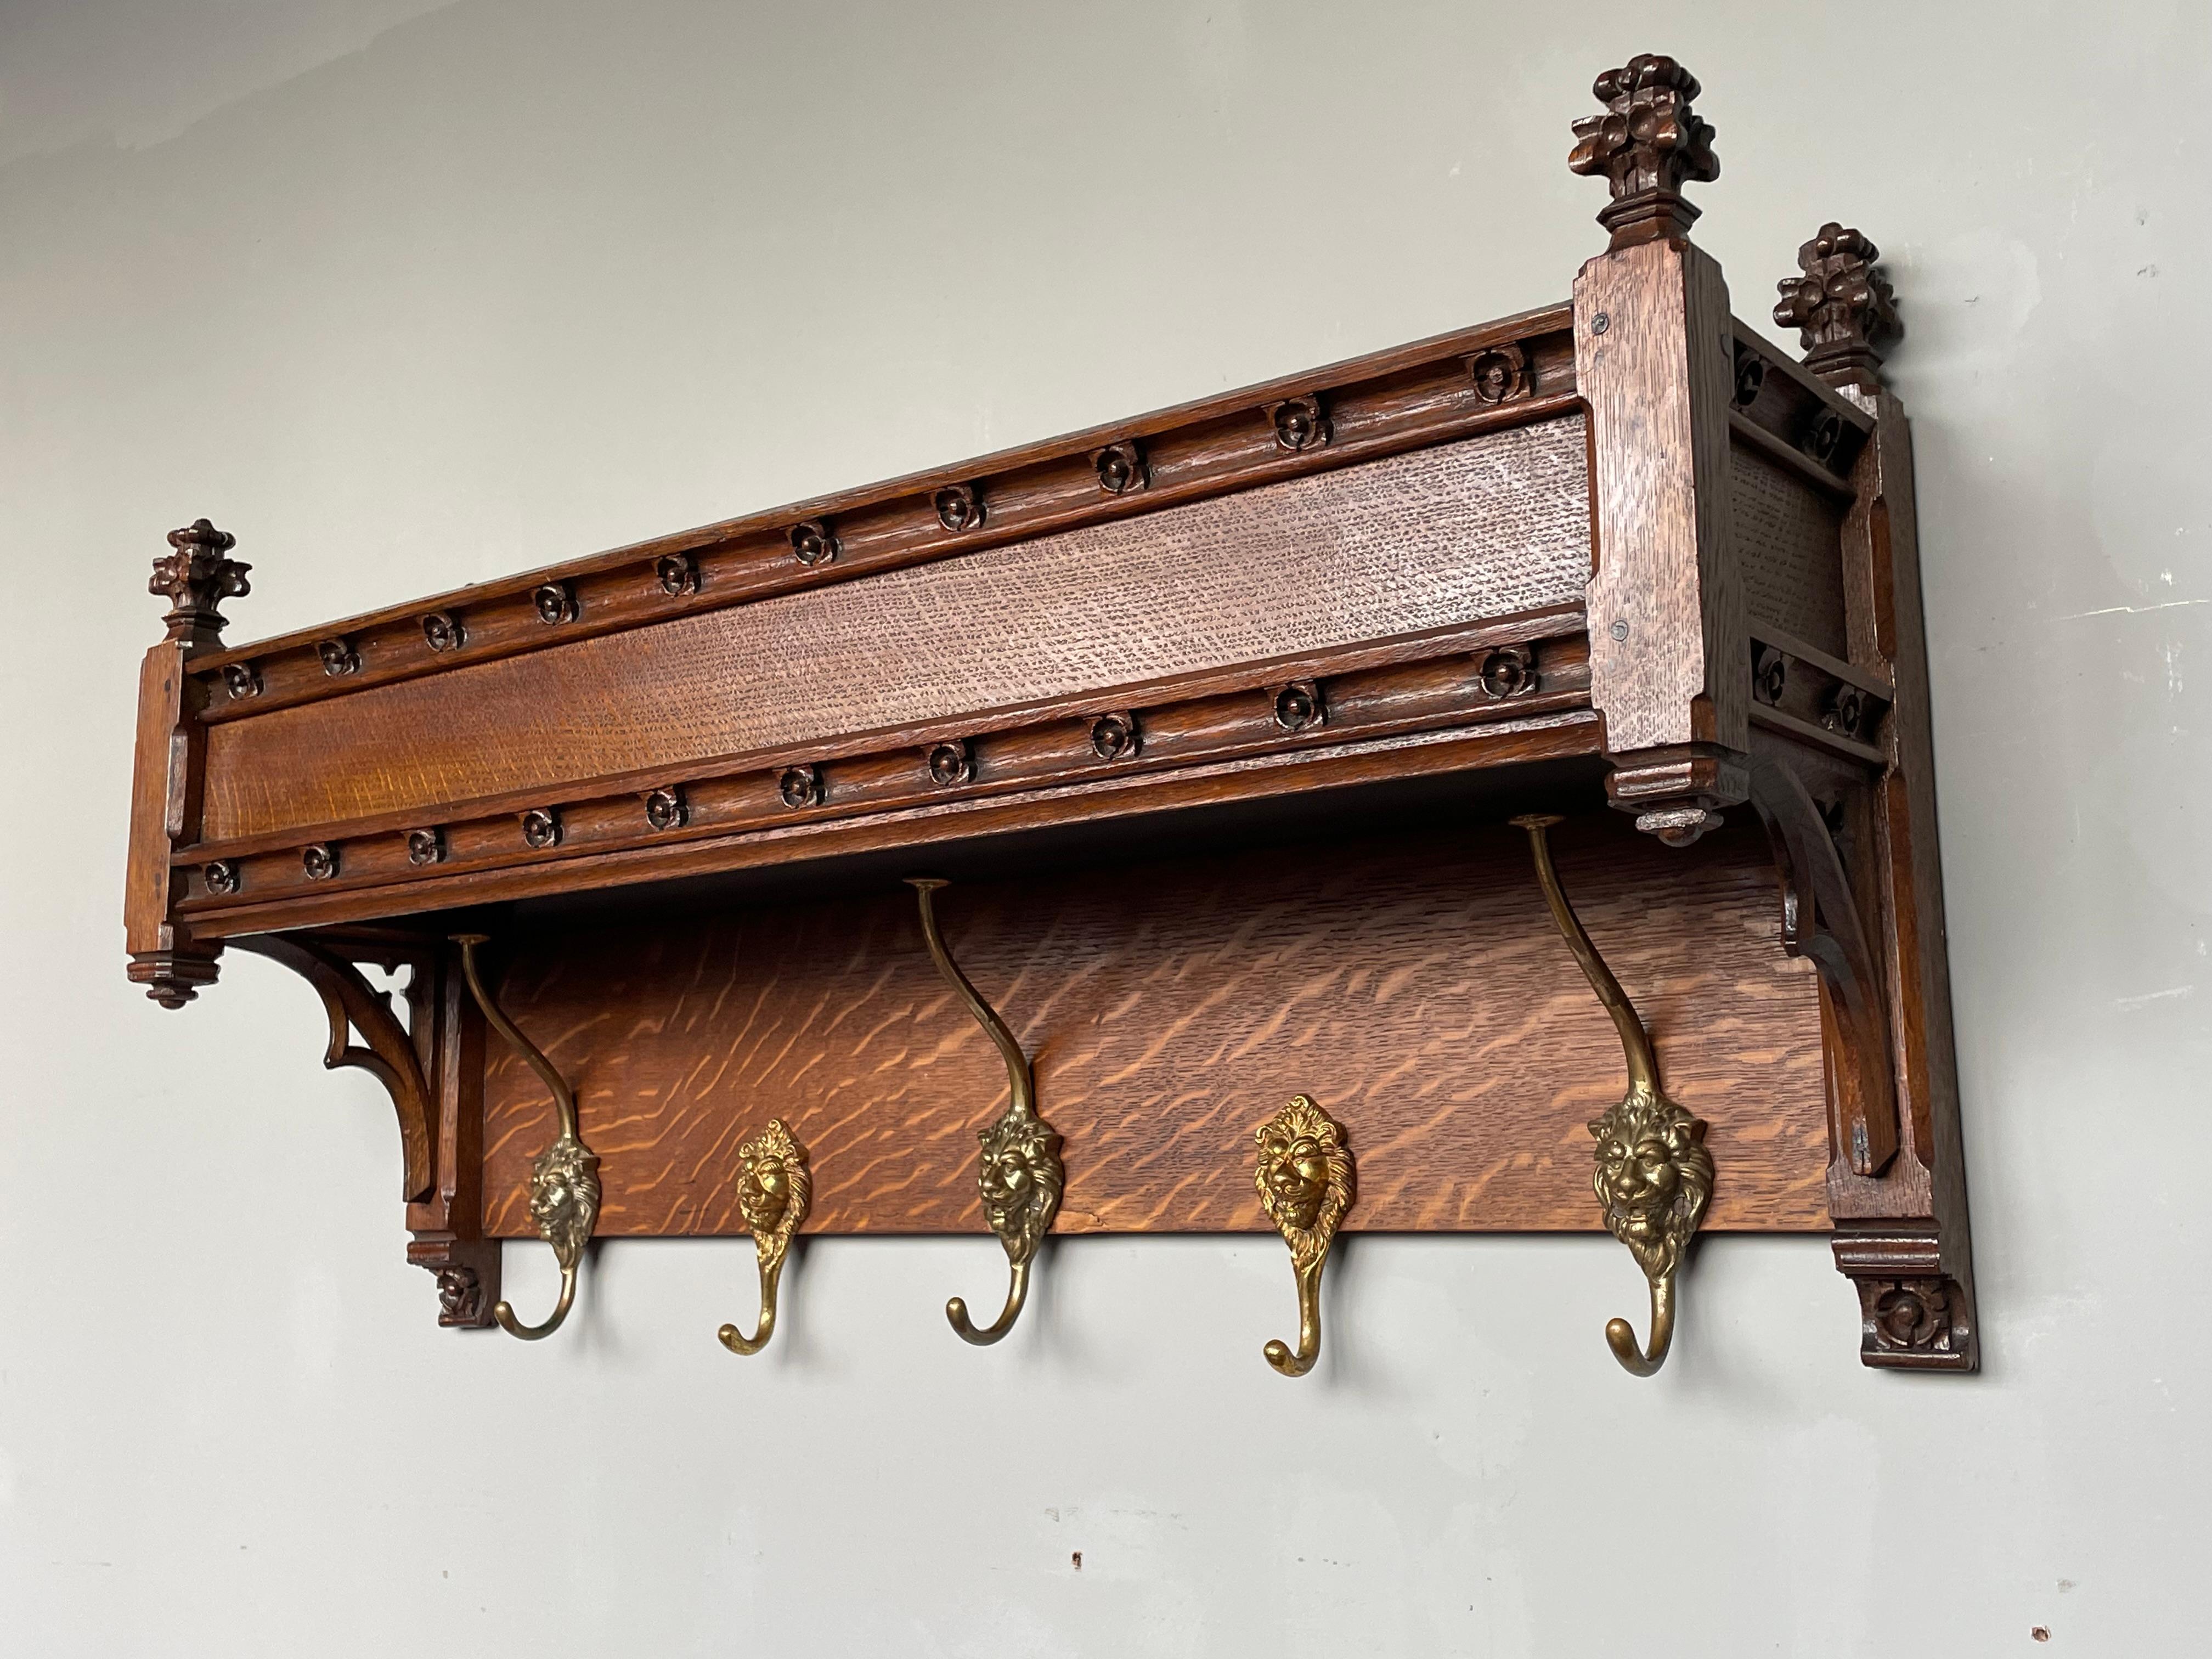 Practical size, very good condition, wonderful craftsmanship, solid oak Gothic Revival wall coat rack.

Anyone who has ever visited a Gothic church or another Gothic style building will immediately recognize the many Gothic style elements in this